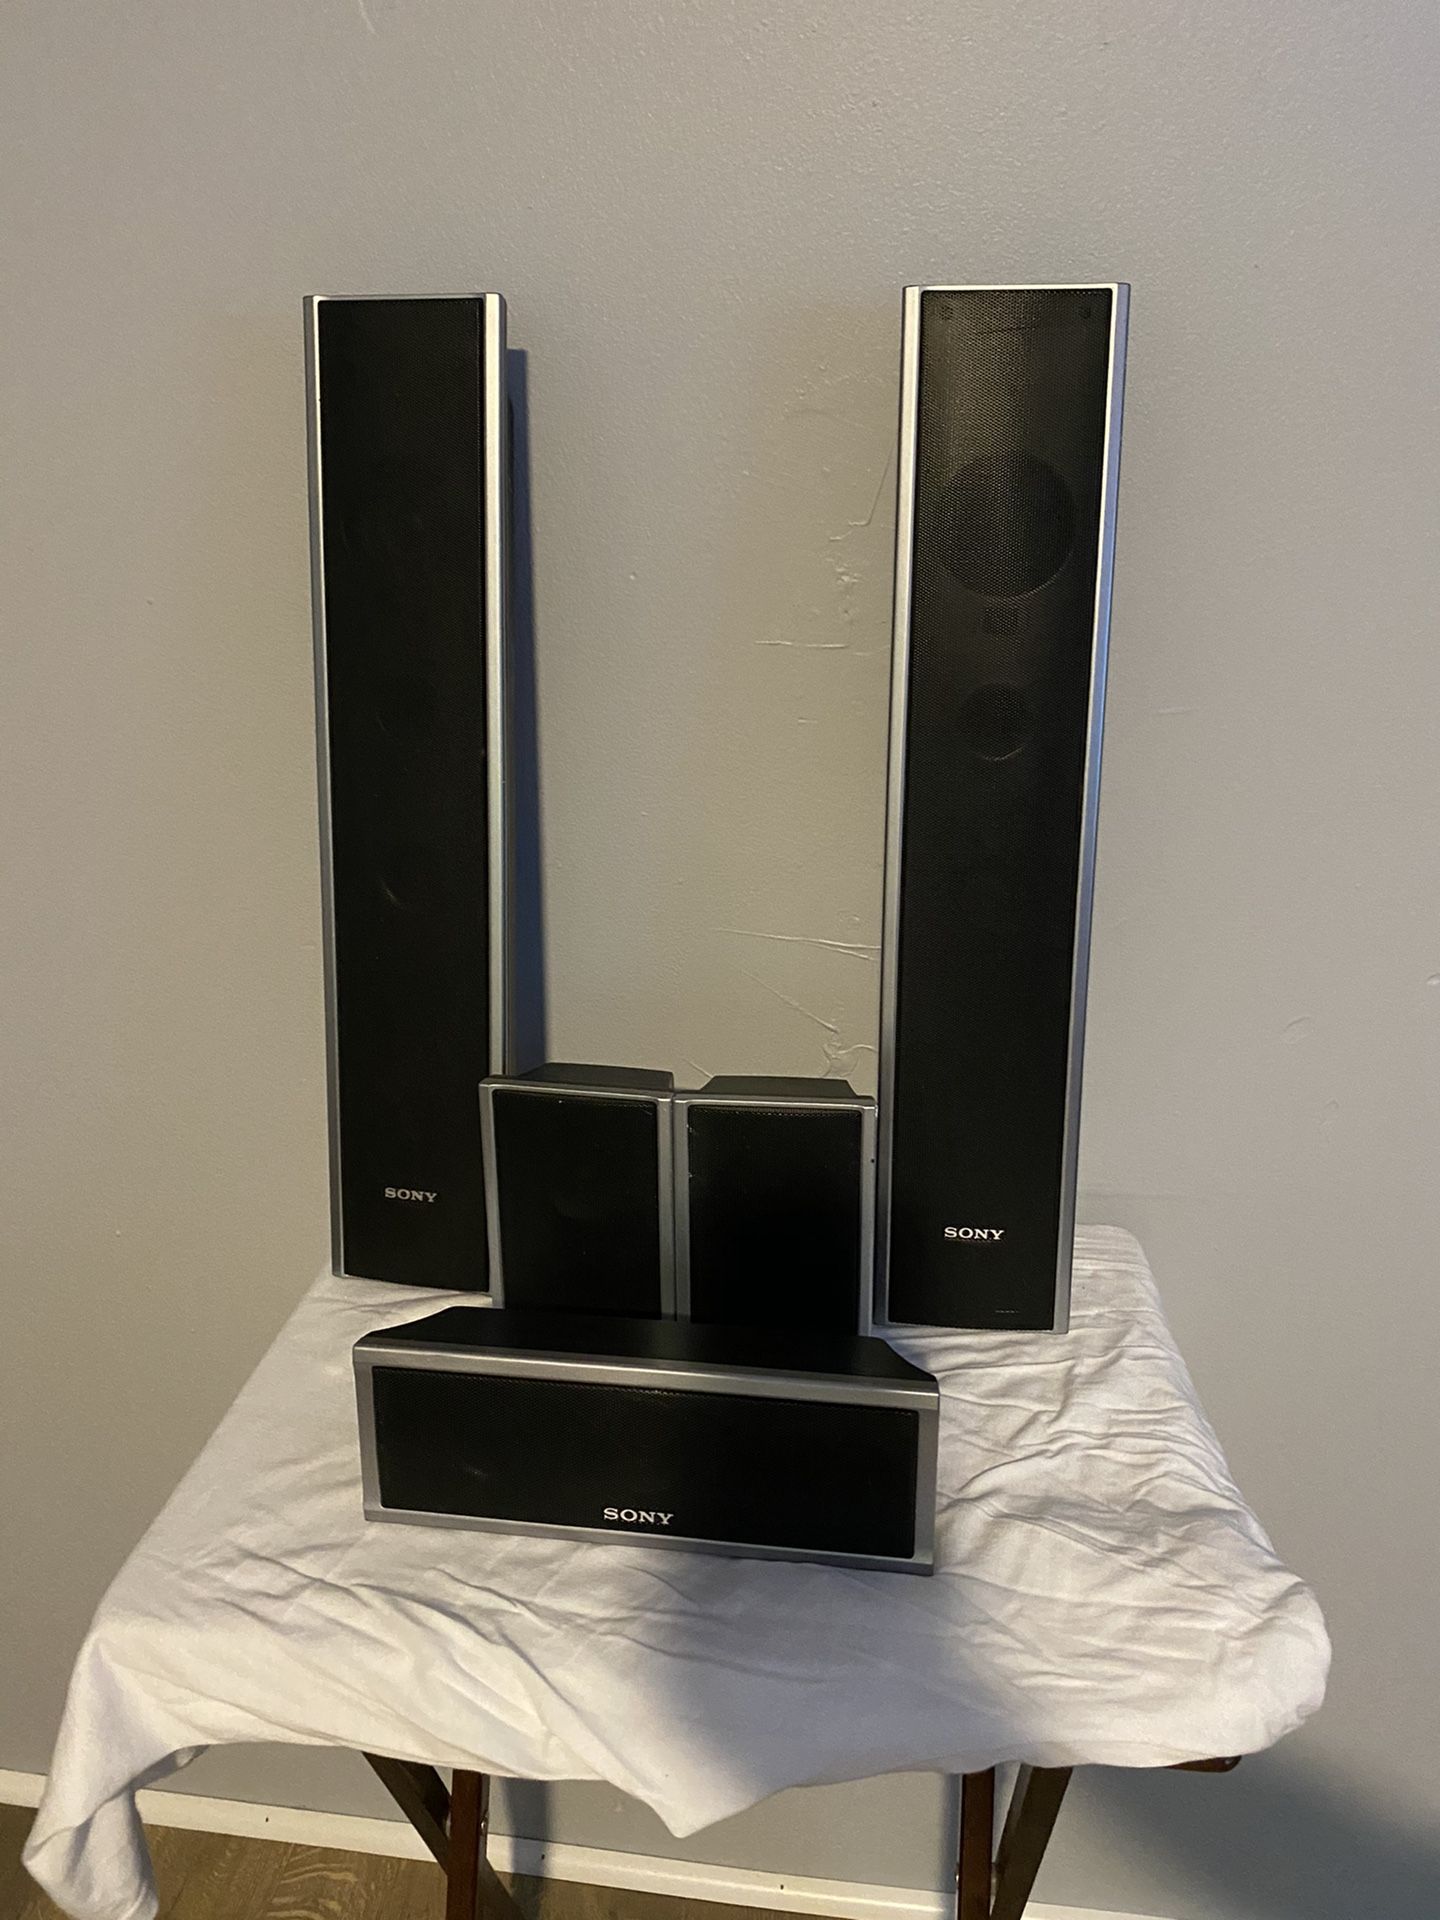 Sony Home Theater Speakers & Subwoofer.